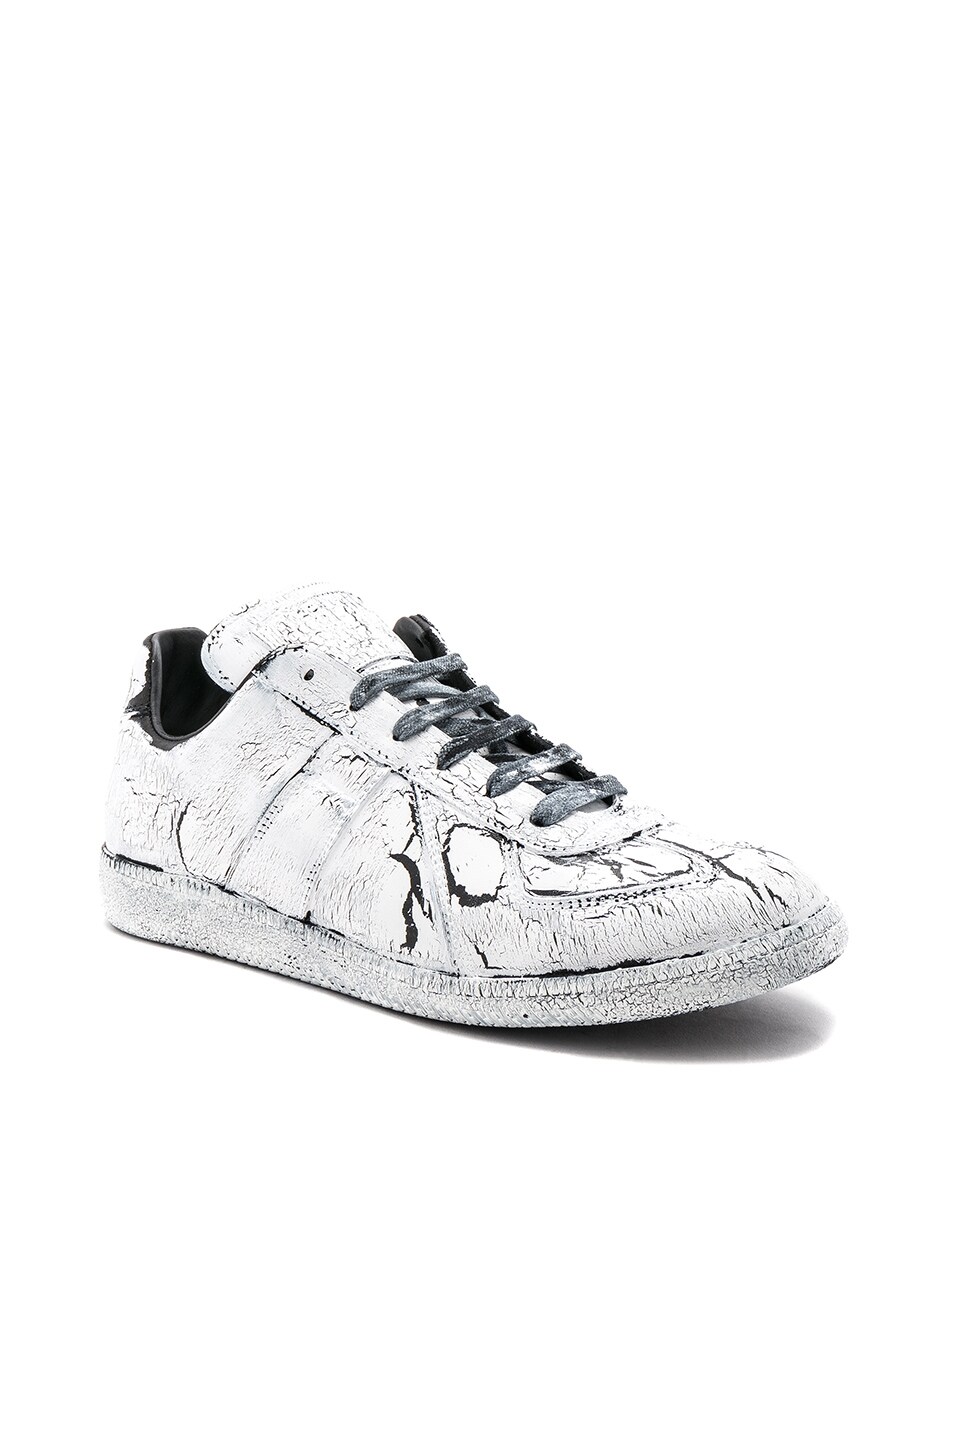 Image 1 of Maison Margiela Crumbled Leather Replica Sneakers in White & Black